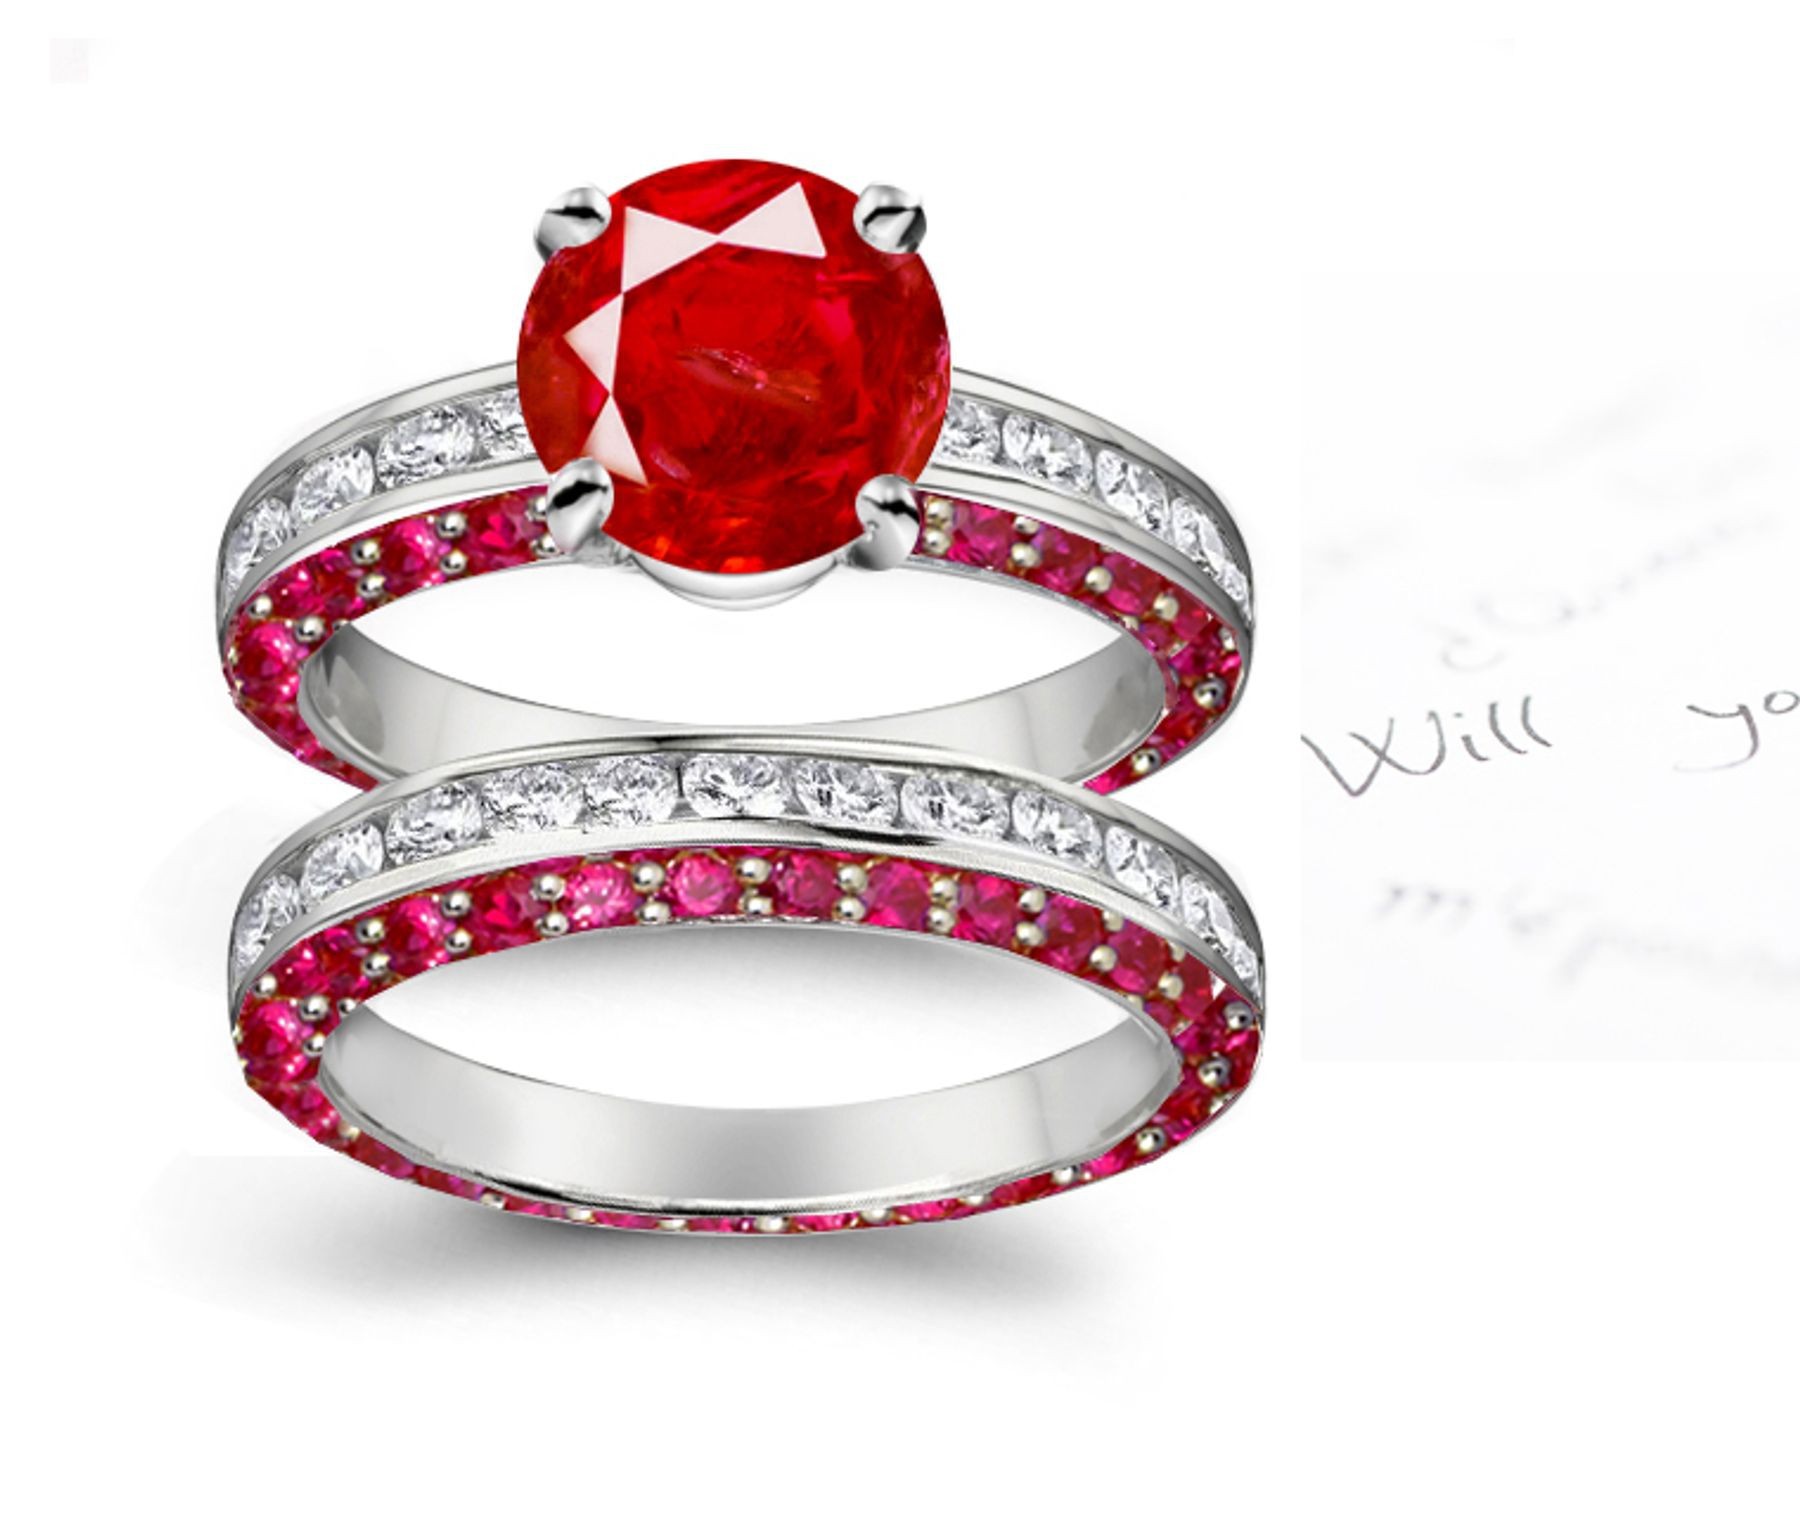 Have The Exclusive Control: Large Prong Set 1.0 ct Top Fine Ruby on Placed Down Ruby Diamond Eternity Ring & Stylish Gold Band Real Savings